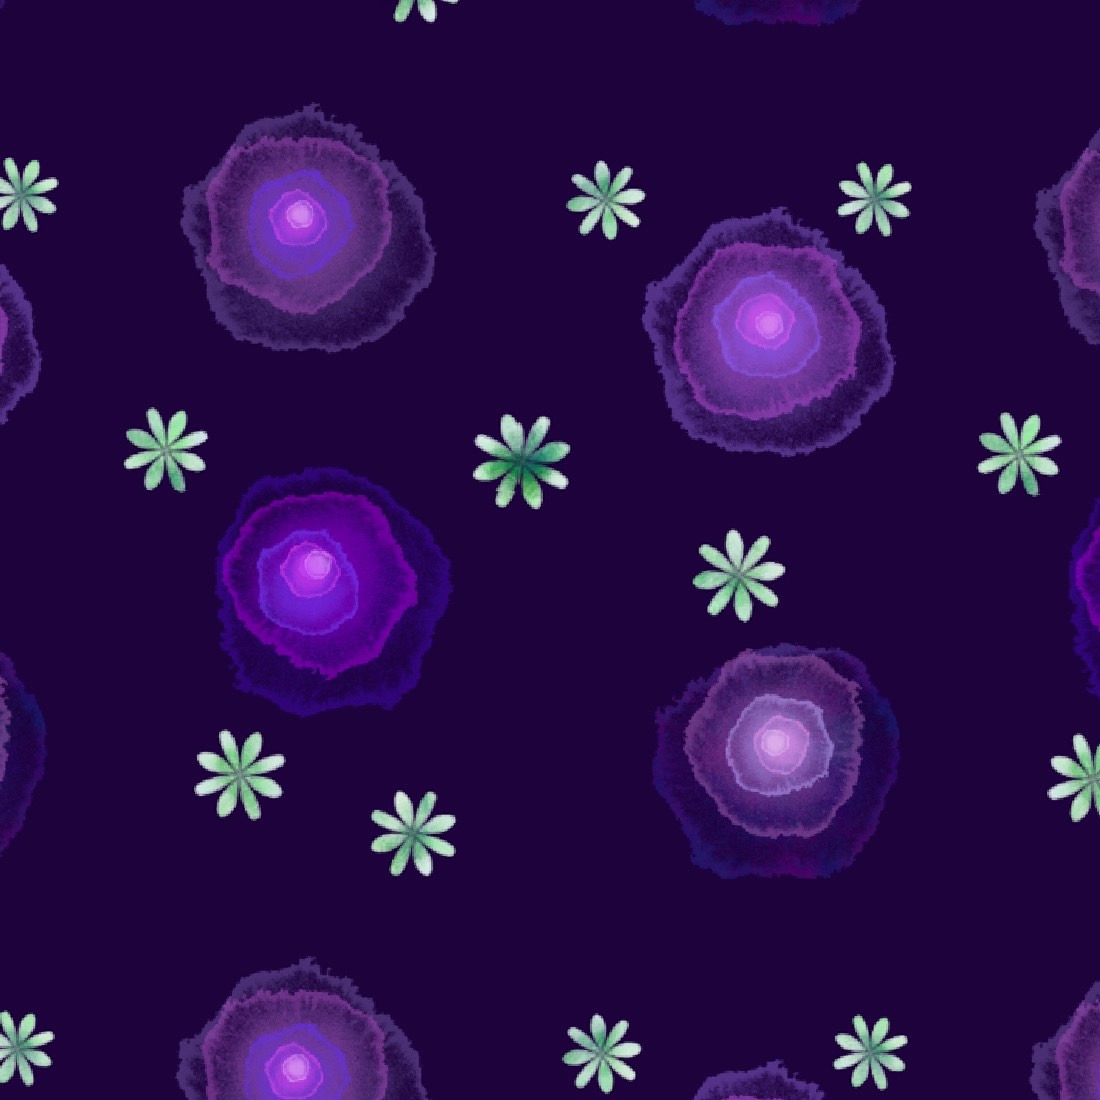 Jellyfish flowers pattern preview image.